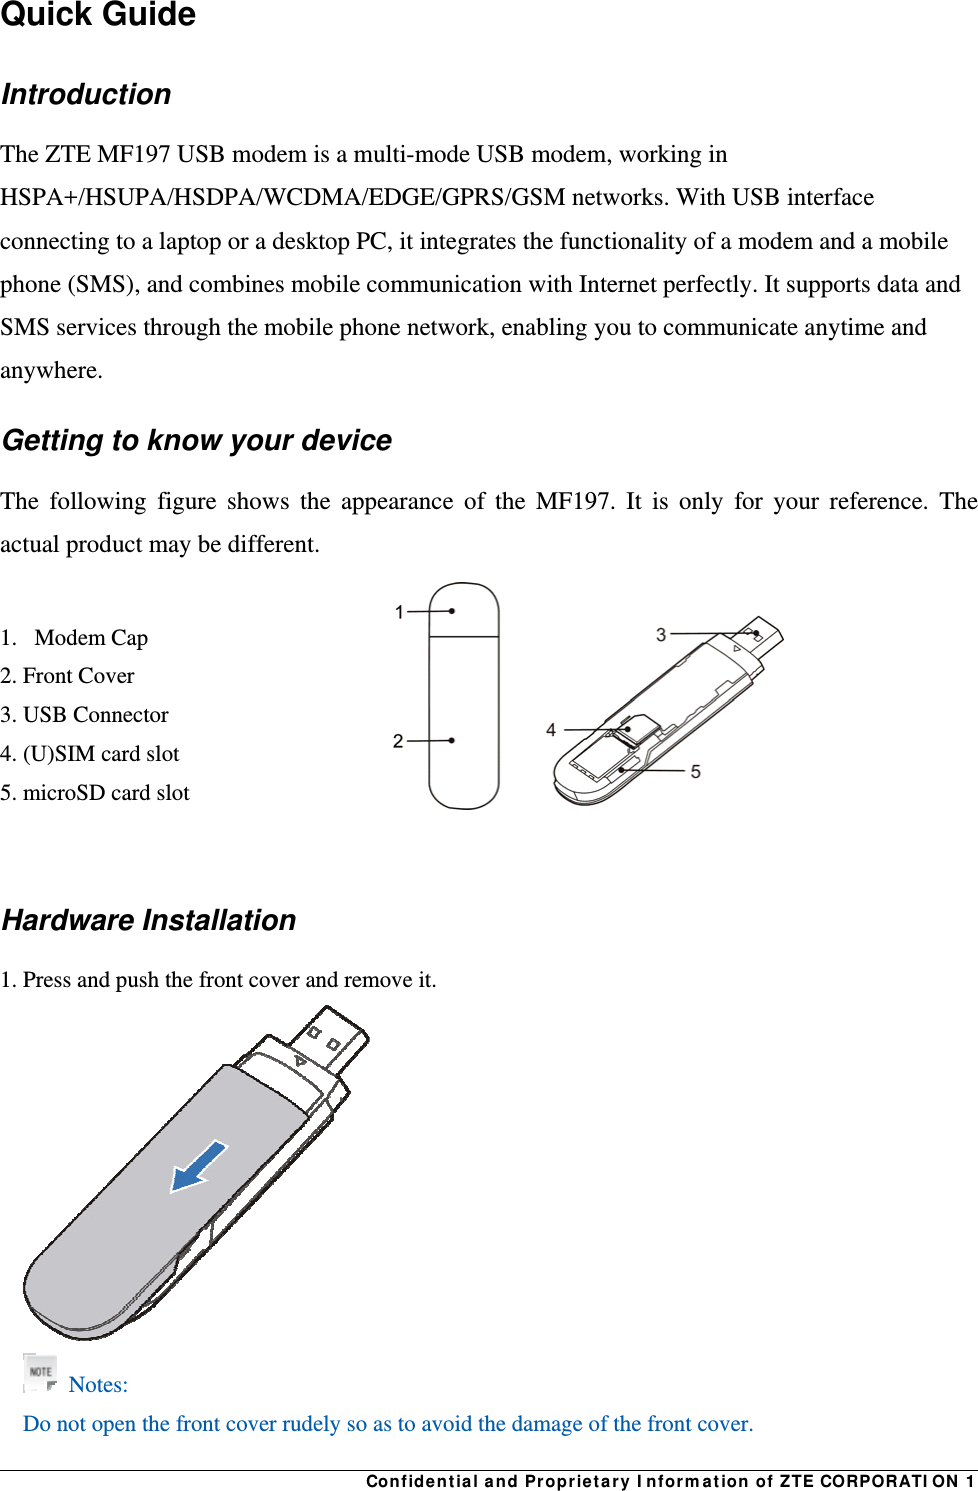  Confidential and Proprietary Information of ZTE CORPORATION 1Quick Guide Introduction The ZTE MF197 USB modem is a multi-mode USB modem, working in HSPA+/HSUPA/HSDPA/WCDMA/EDGE/GPRS/GSM networks. With USB interface connecting to a laptop or a desktop PC, it integrates the functionality of a modem and a mobile phone (SMS), and combines mobile communication with Internet perfectly. It supports data and SMS services through the mobile phone network, enabling you to communicate anytime and anywhere. Getting to know your device The following figure shows the appearance of the MF197. It is only for your reference. The actual product may be different.  1.   Modem Cap 2. Front Cover 3. USB Connector   4. (U)SIM card slot  5. microSD card slot   Hardware Installation 1. Press and push the front cover and remove it.       Notes: Do not open the front cover rudely so as to avoid the damage of the front cover.     